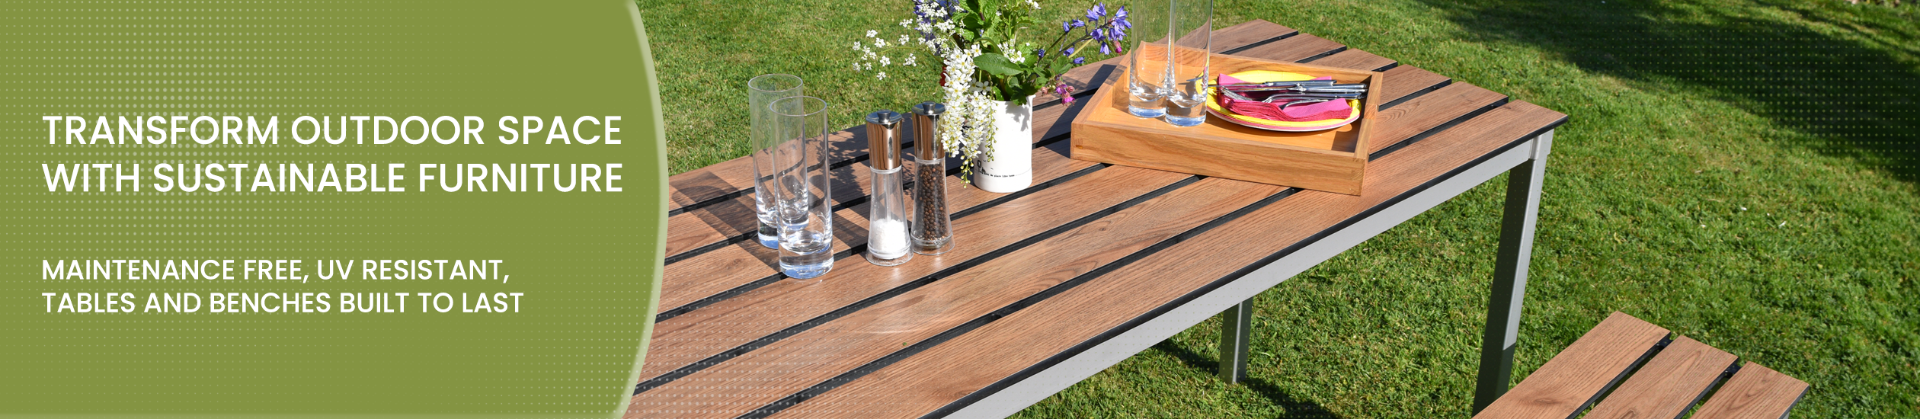 TRANSFORM OUTDOOR SPACE WITH SUSTAINABLE FURNITURE MAINTENANCE FREE, UV RESISTANT, TABLES AND BENCHES BUILT TO LAST